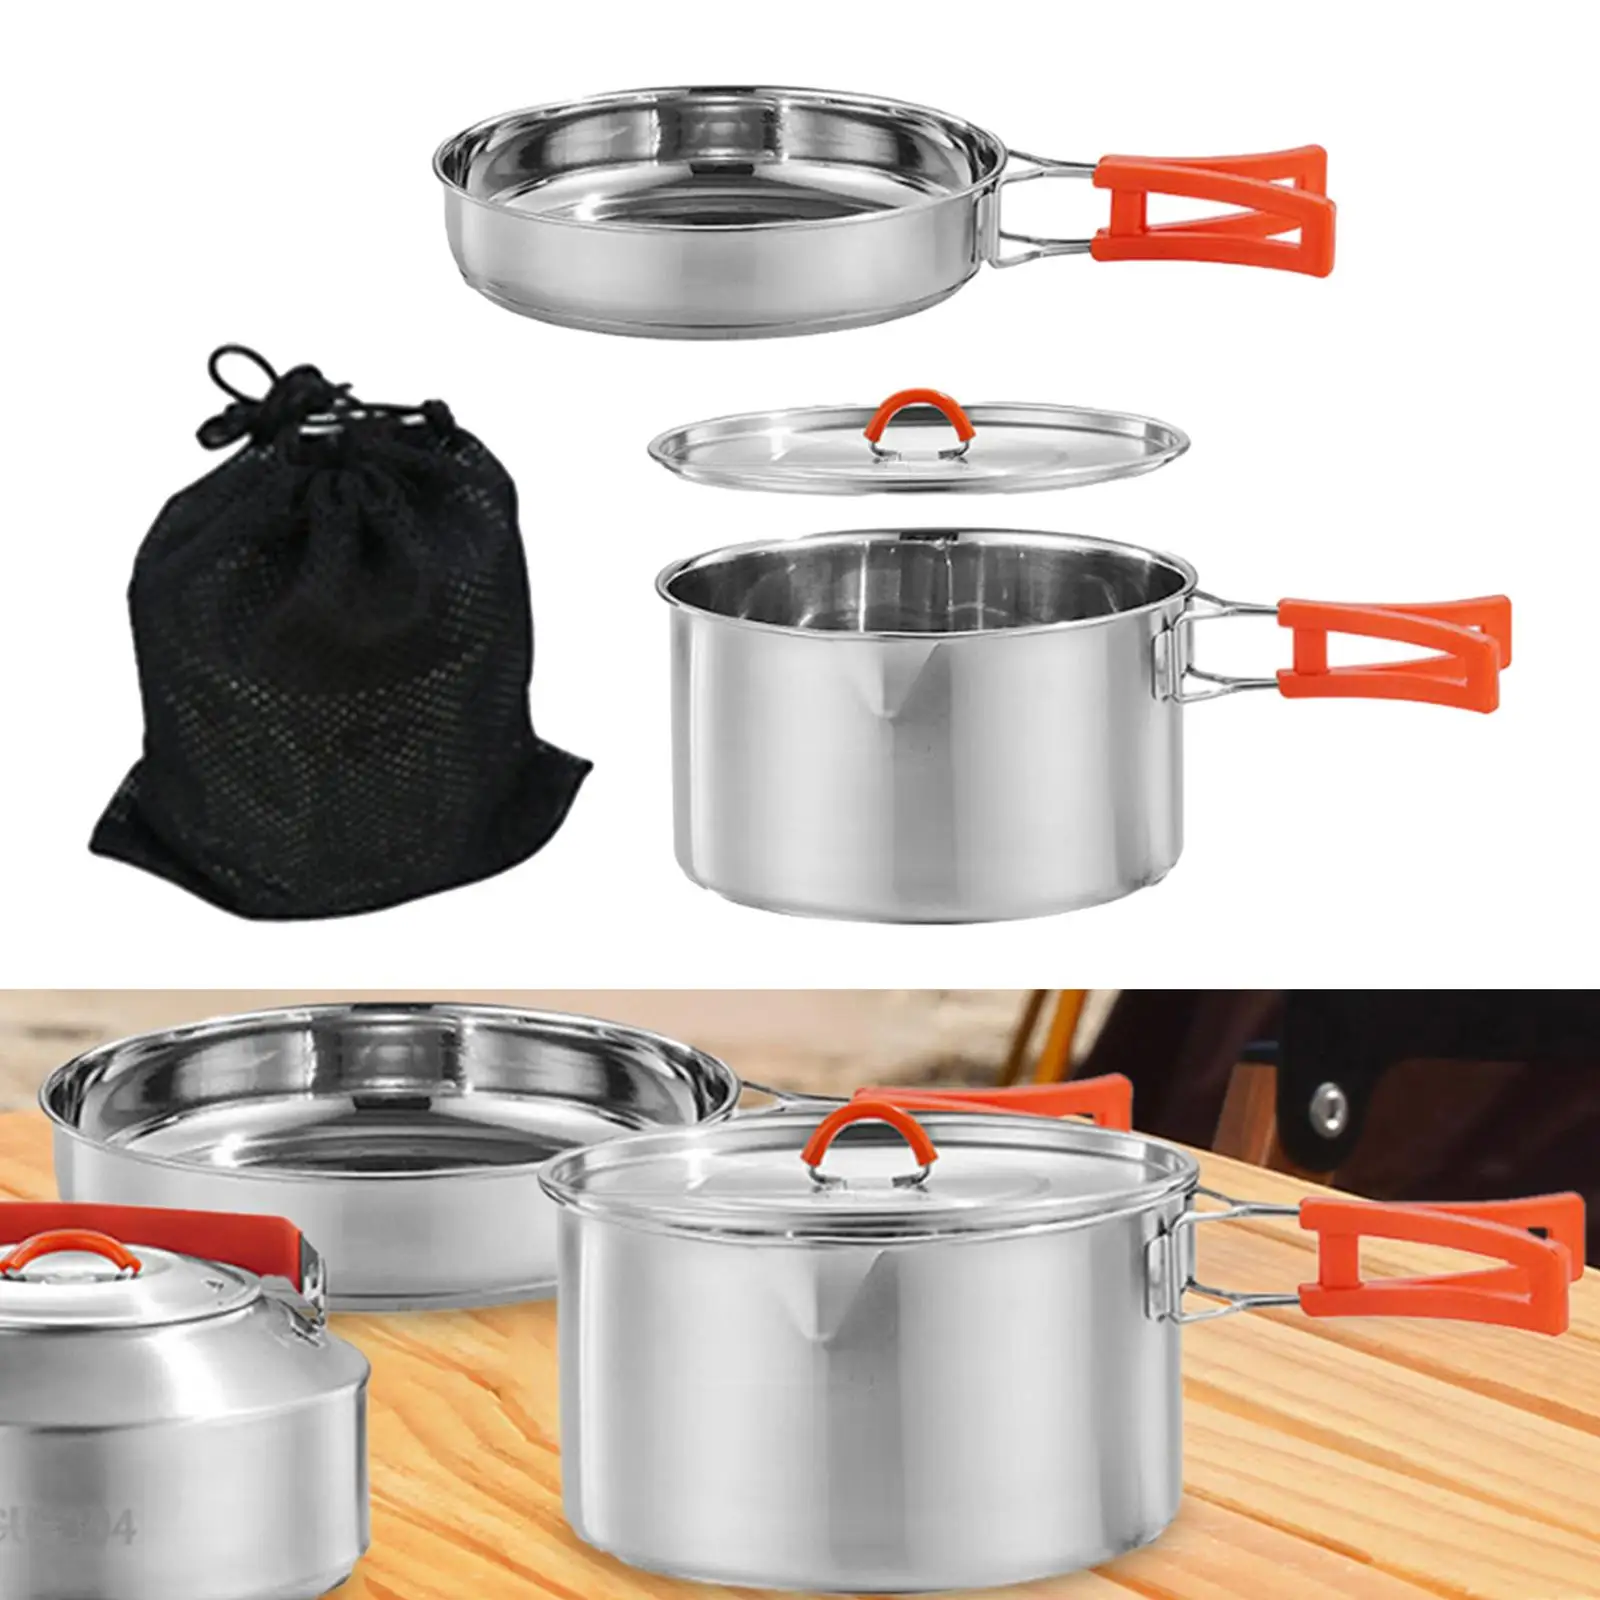 Camping Cookware with Folding Handles Lightweight with Mesh Carry Bag for Camp Picnic Hiking Backpacking Camping Accessories